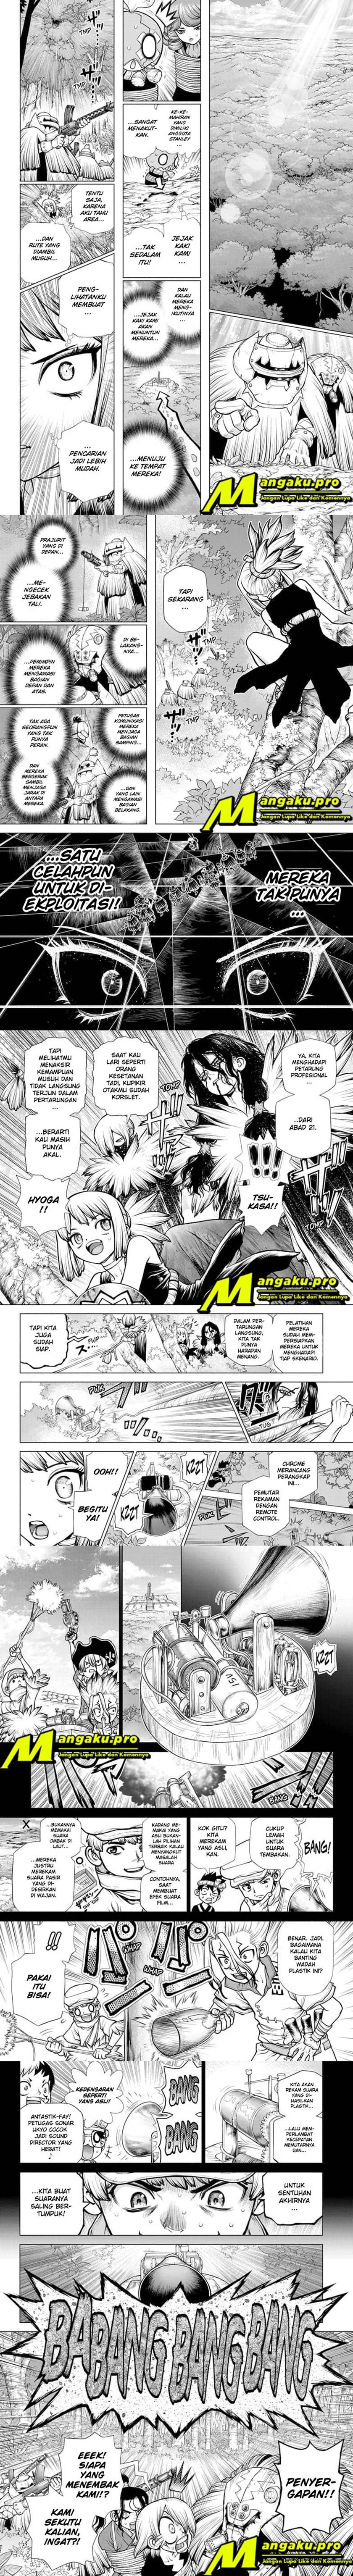 Dr Stone Chapter 187